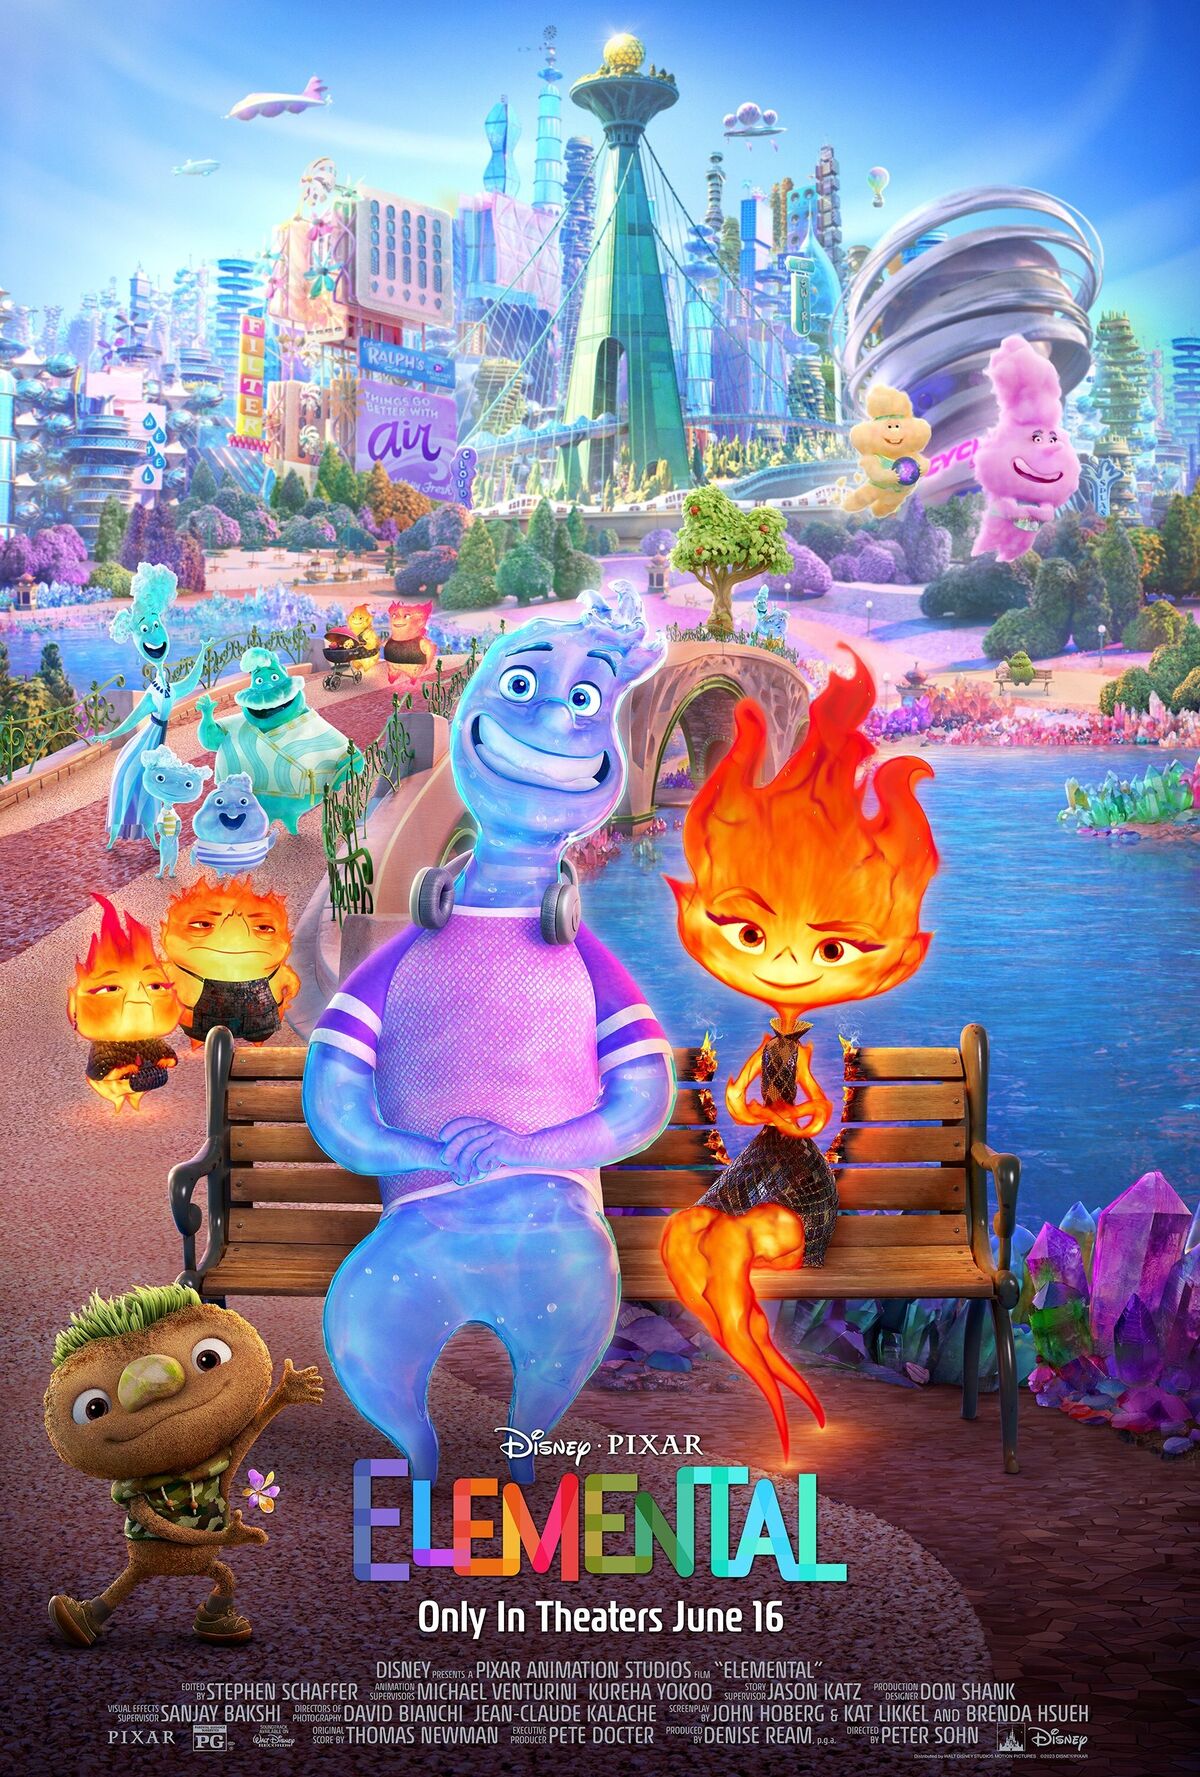 https://static.wikia.nocookie.net/disney/images/5/5a/Elemental_Poster_3.jpg/revision/latest/scale-to-width-down/1200?cb=20230517141040